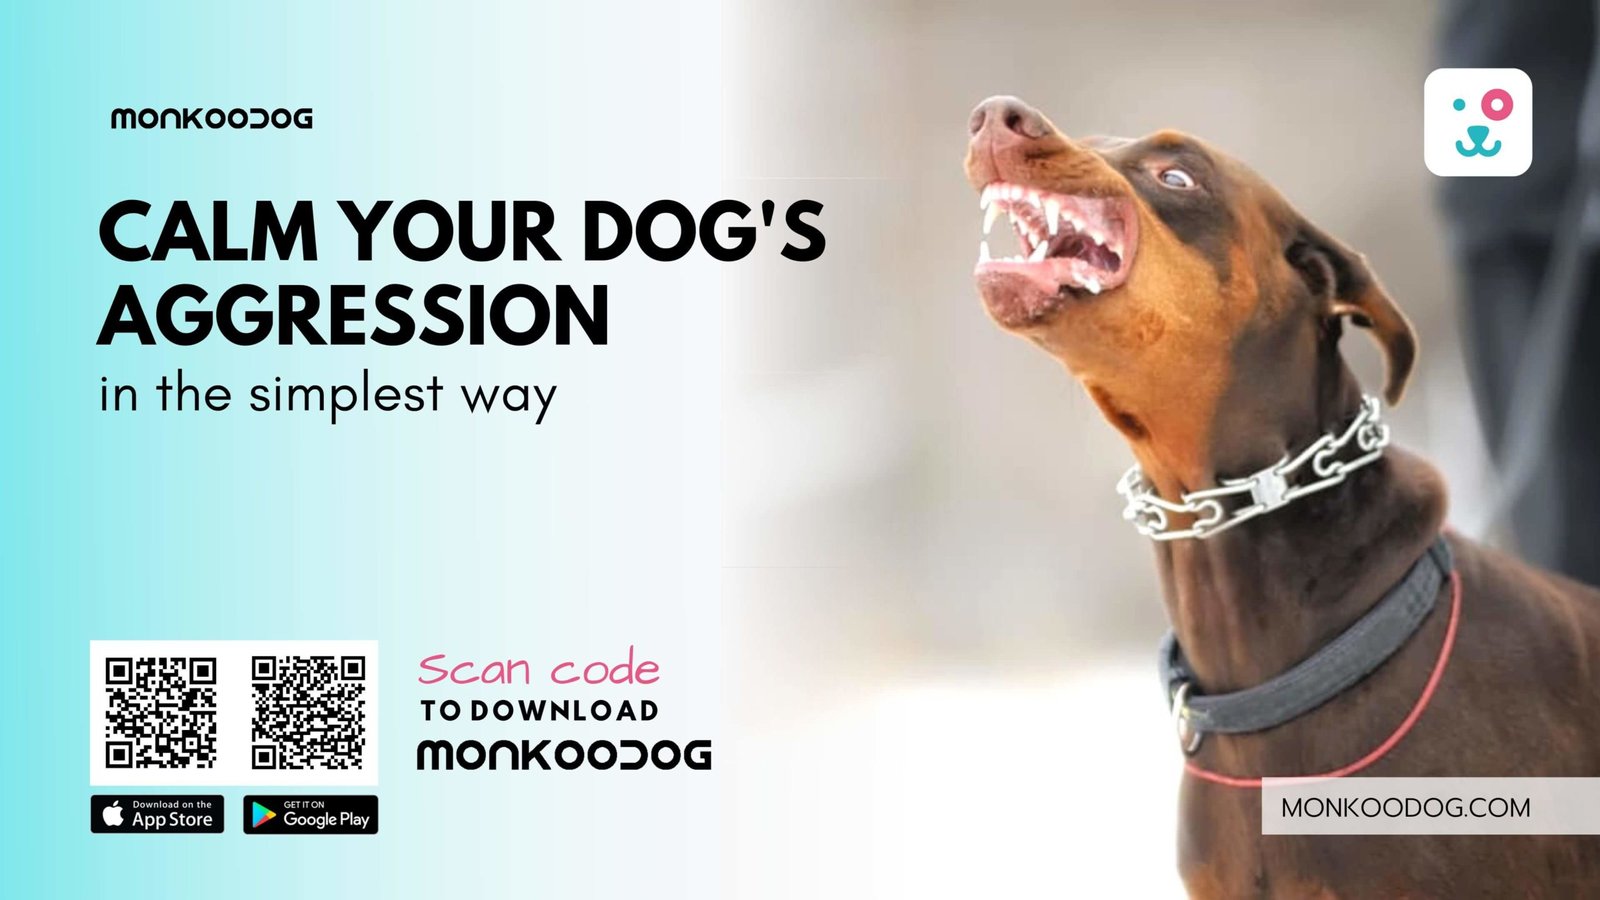 How to Calm Dog Aggression in the Simplest Way